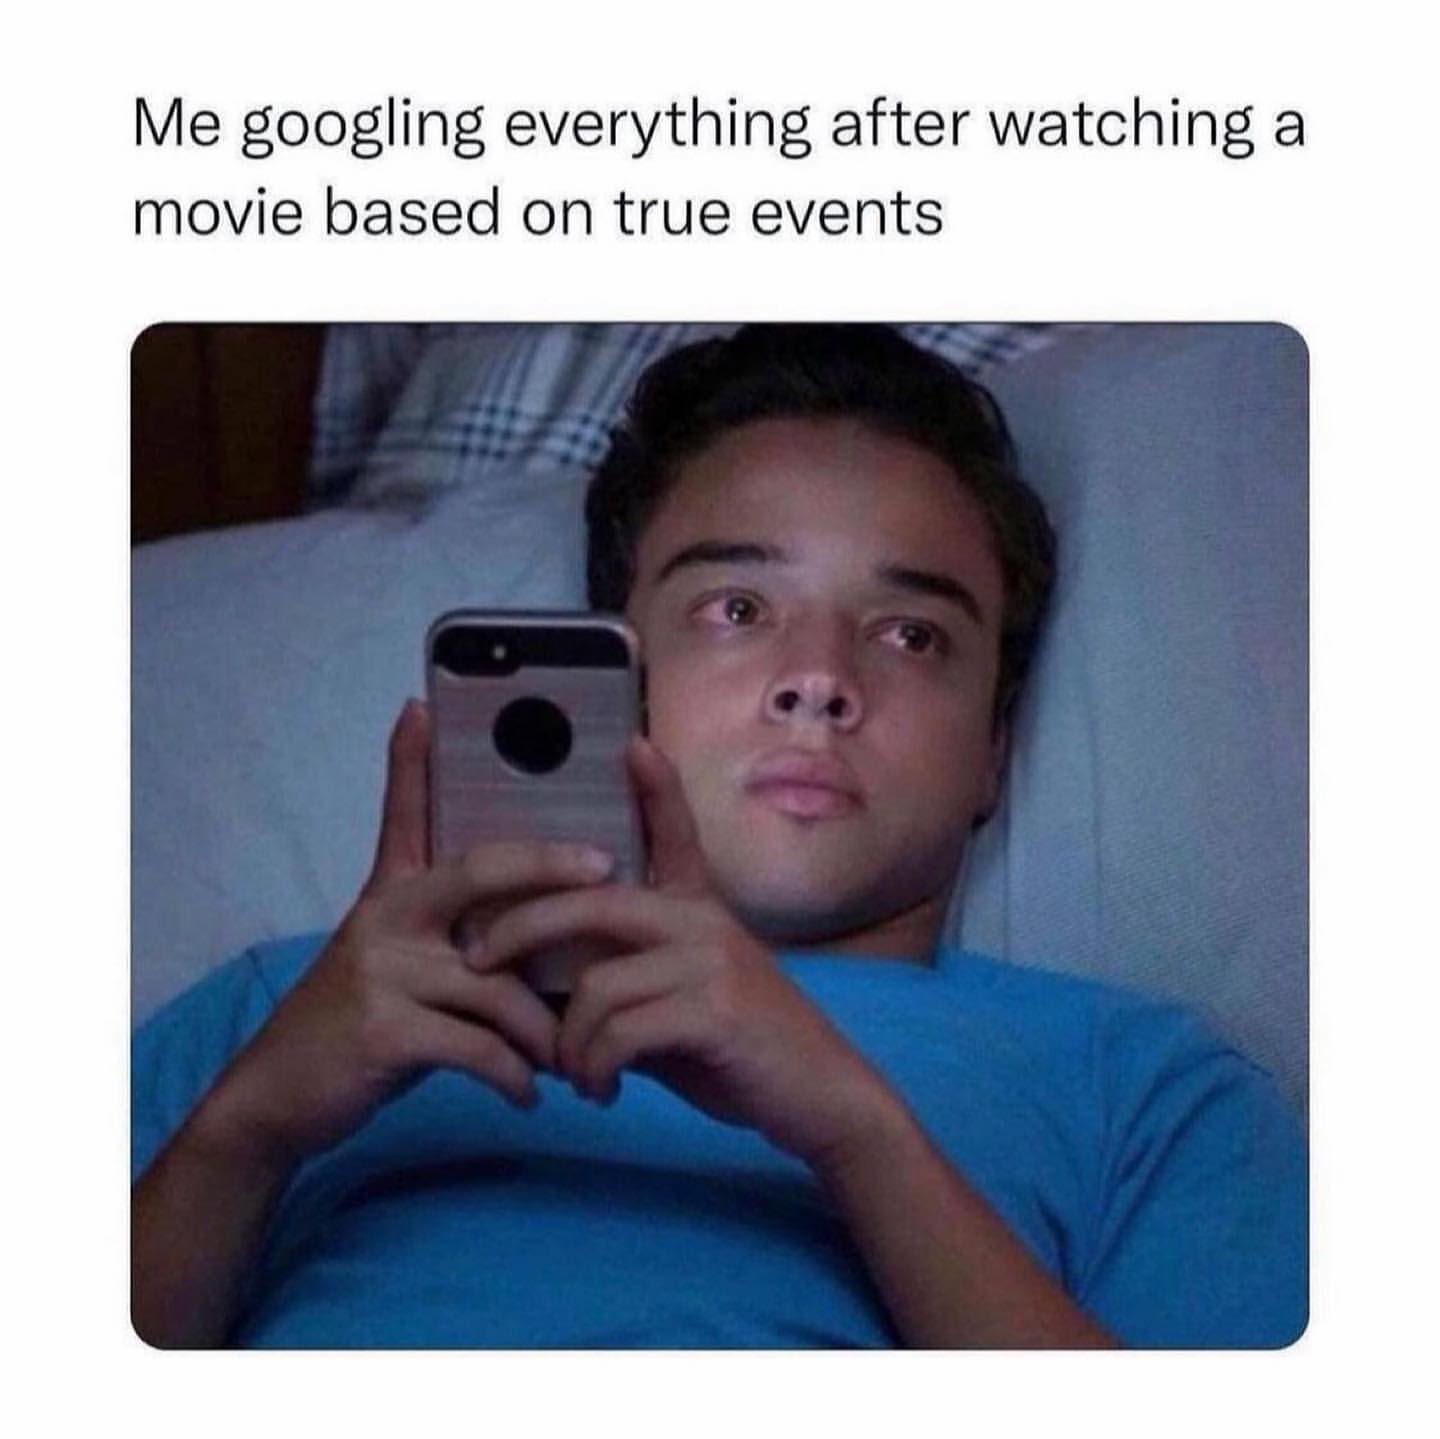 Me googling everything after watching a movie based on true events.